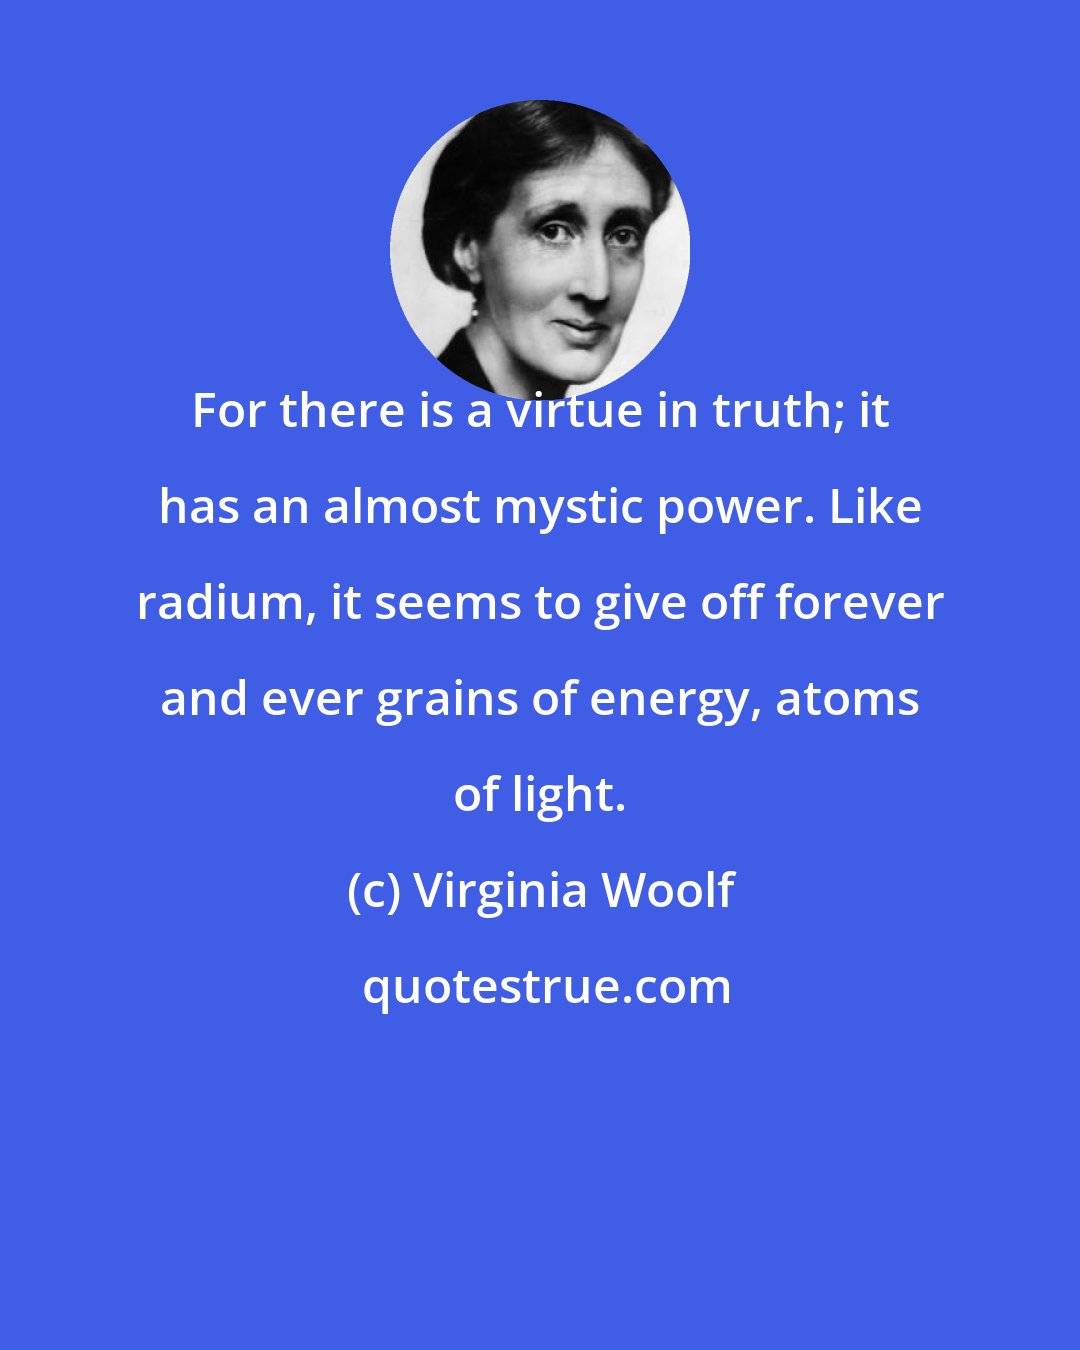 Virginia Woolf: For there is a virtue in truth; it has an almost mystic power. Like radium, it seems to give off forever and ever grains of energy, atoms of light.